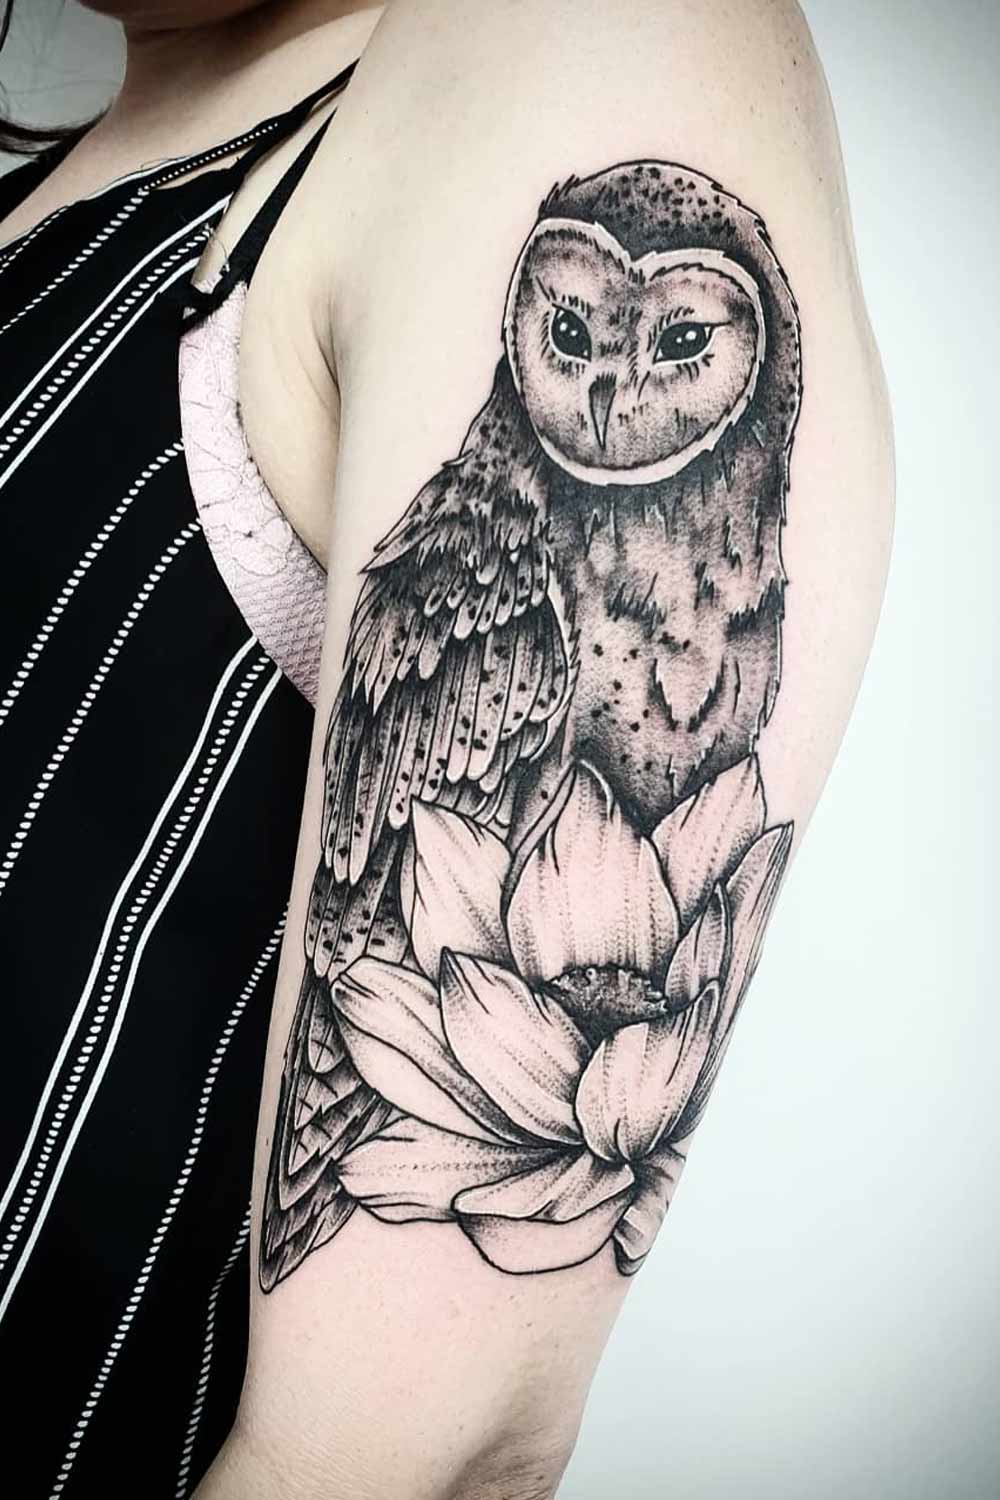 Vintage Black Owl Arm Fake Tattoo Sexy Temporary Tattoos Sticker Wo Body  Art SH190724 From Lizhang01, $40.21 | DHgate.Com